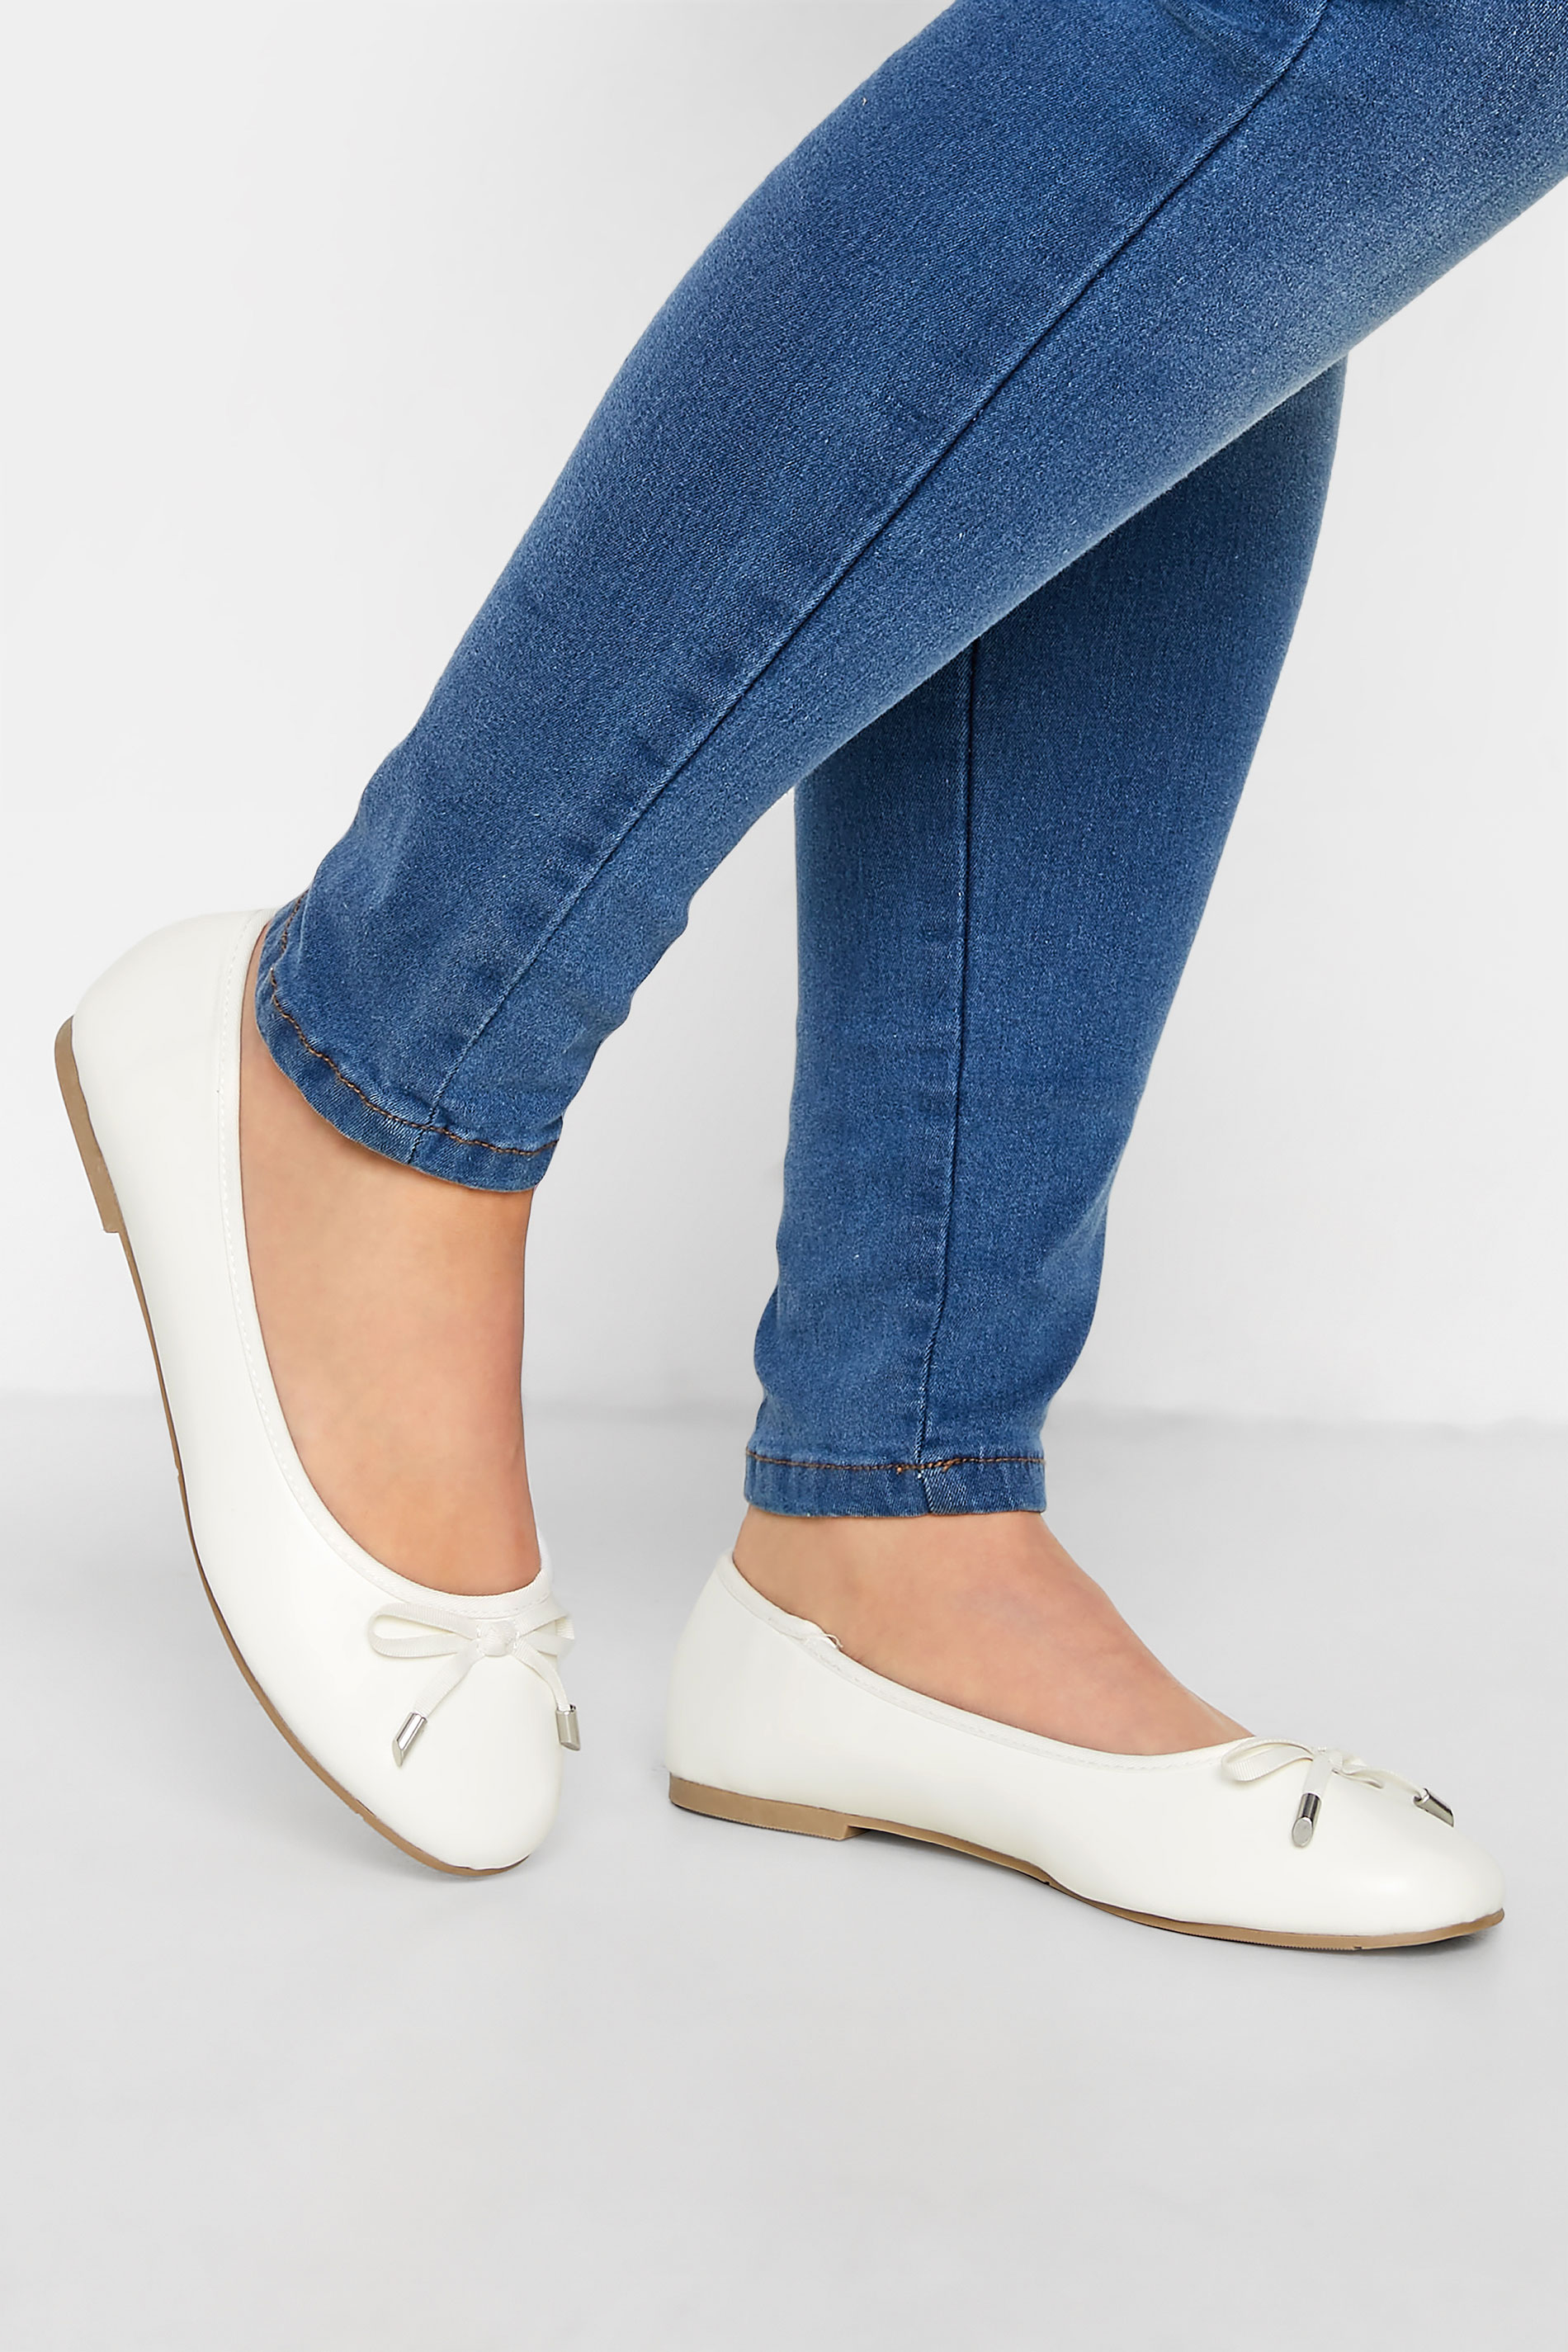 White Ballerina Pumps In Wide E Fit & Extra Wide EEE Fit | Yours Clothing 1